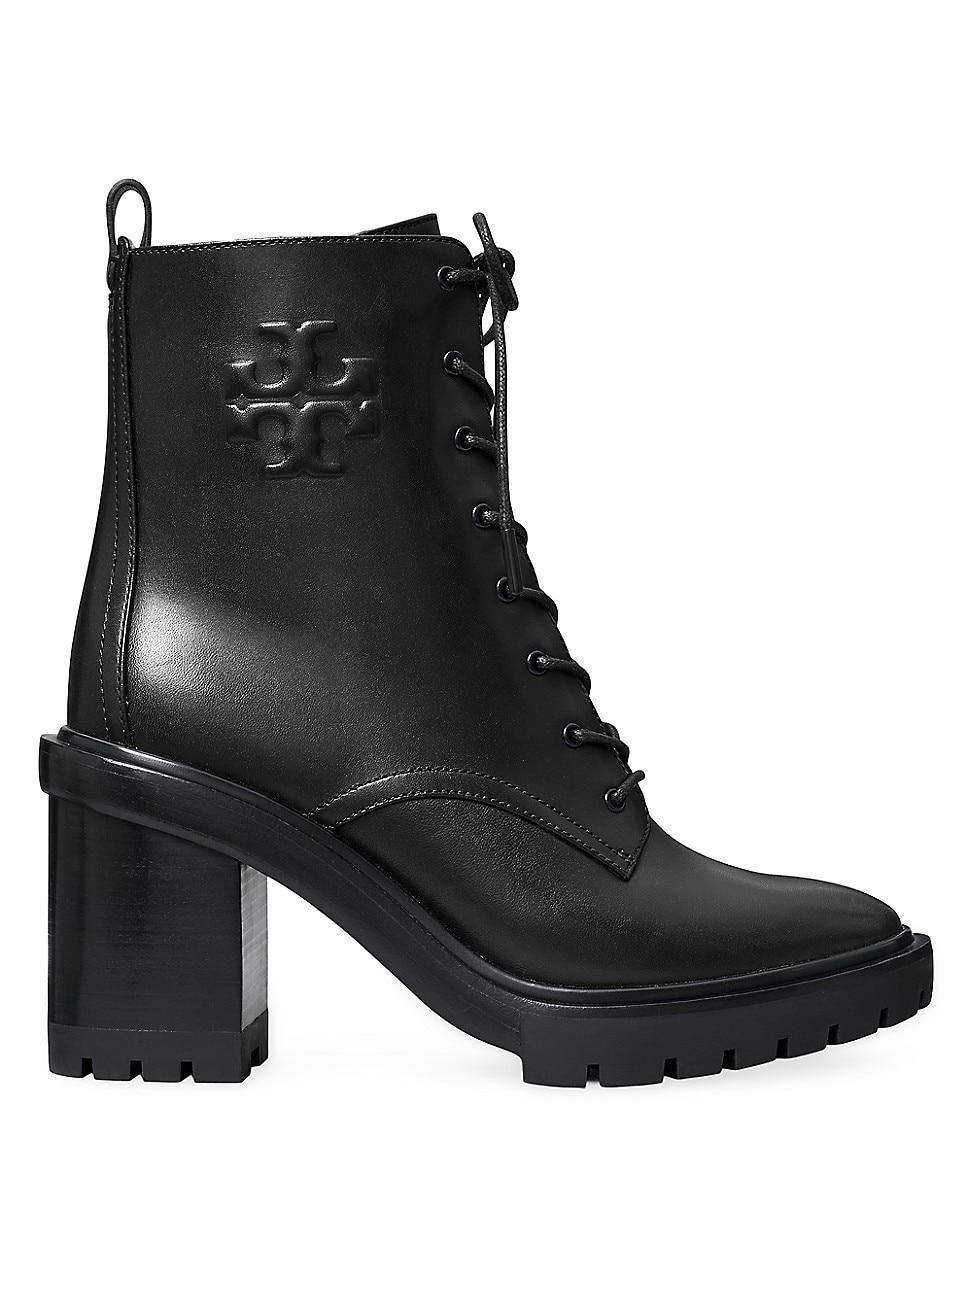 Tory Burch Womens Double T Lug High Heel Boots Product Image